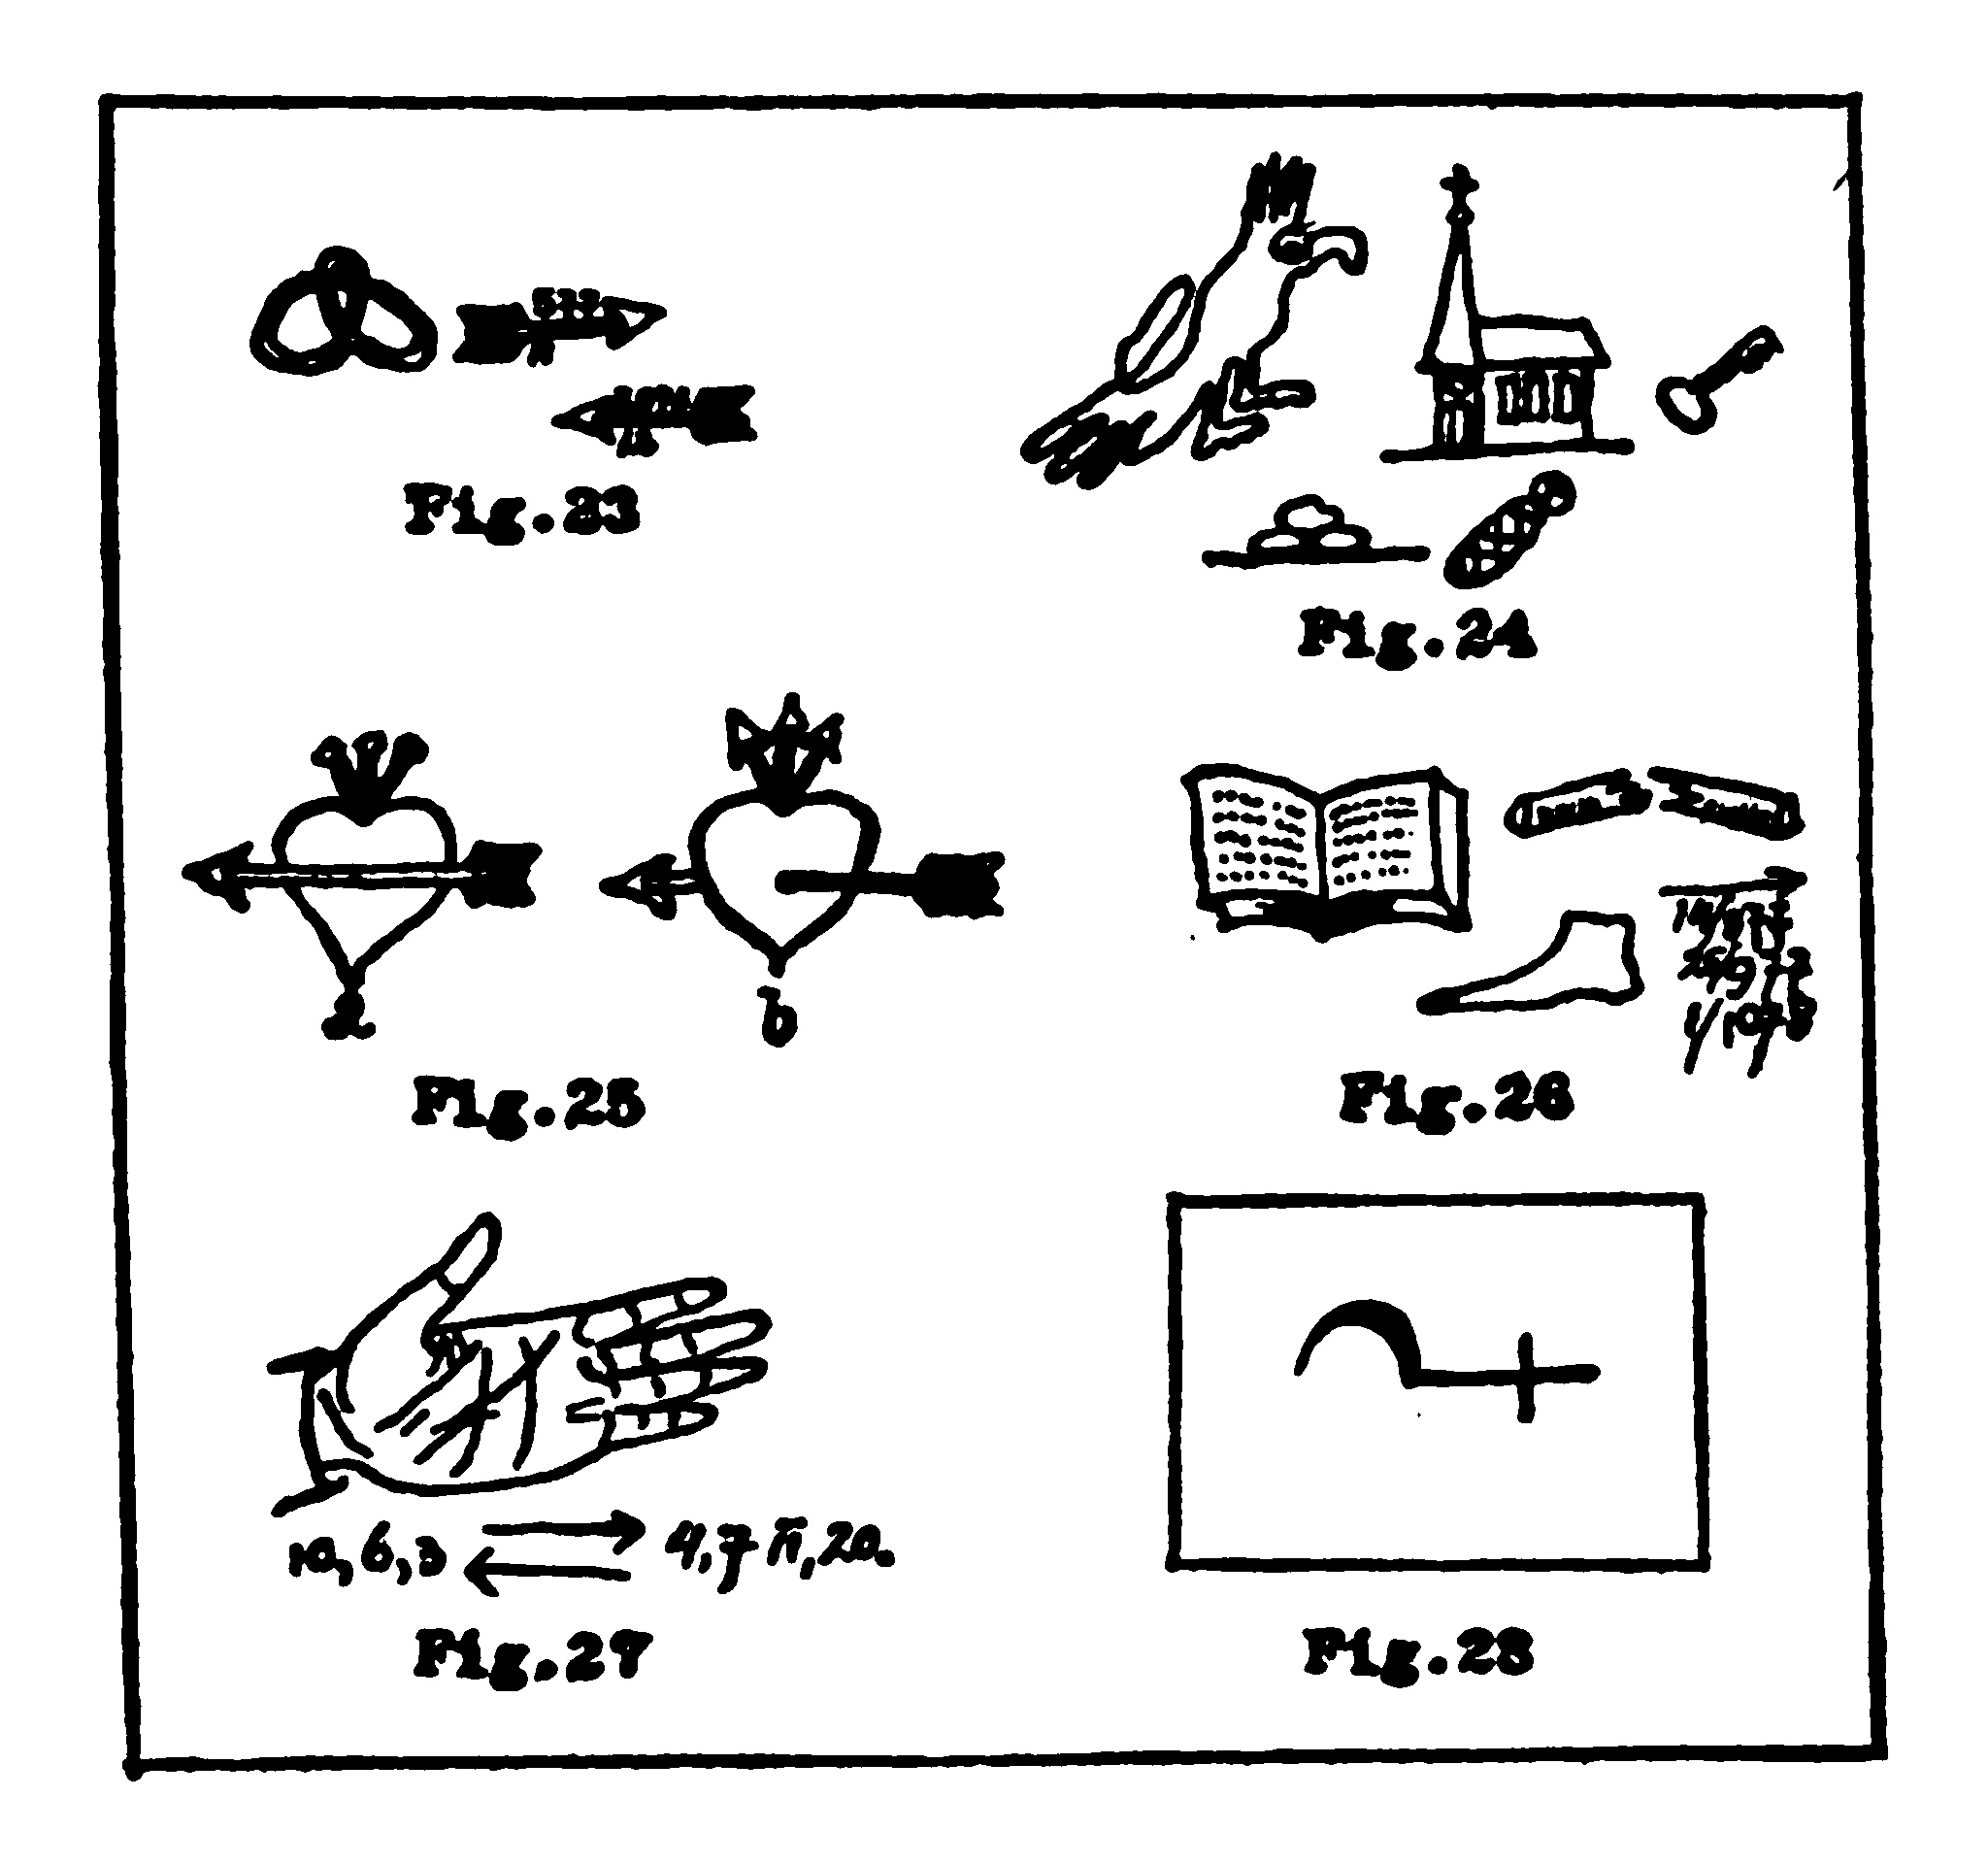 A set of six figures, labelled     “Fig. 23” through “Fig. 28,” showing a variety of arcane drawings.     Fig. 24, for example, is a drawing of a parrot, a pile of three     stones, a church, a key and a swaddled infant. Fig. 25 shows two     variants of a drawing of a heart pierced by arrows and/or nails.     The other figures include drawings of things such as a knot,     numbered arrows, a hand, and a book.